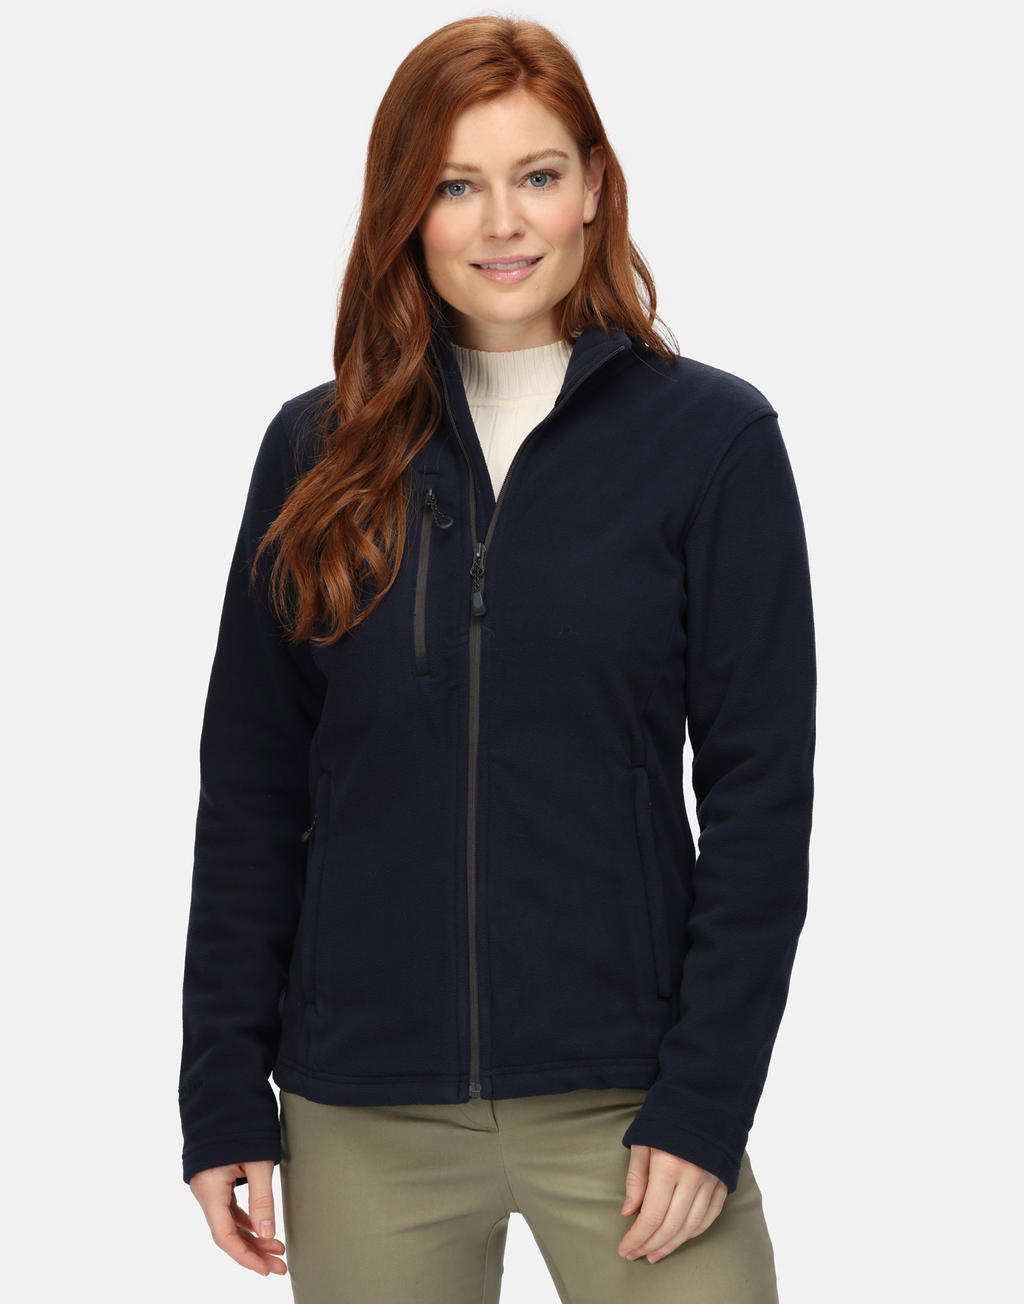  Womens Honestly Made Recycled Full Zip Fleece in Farbe Black